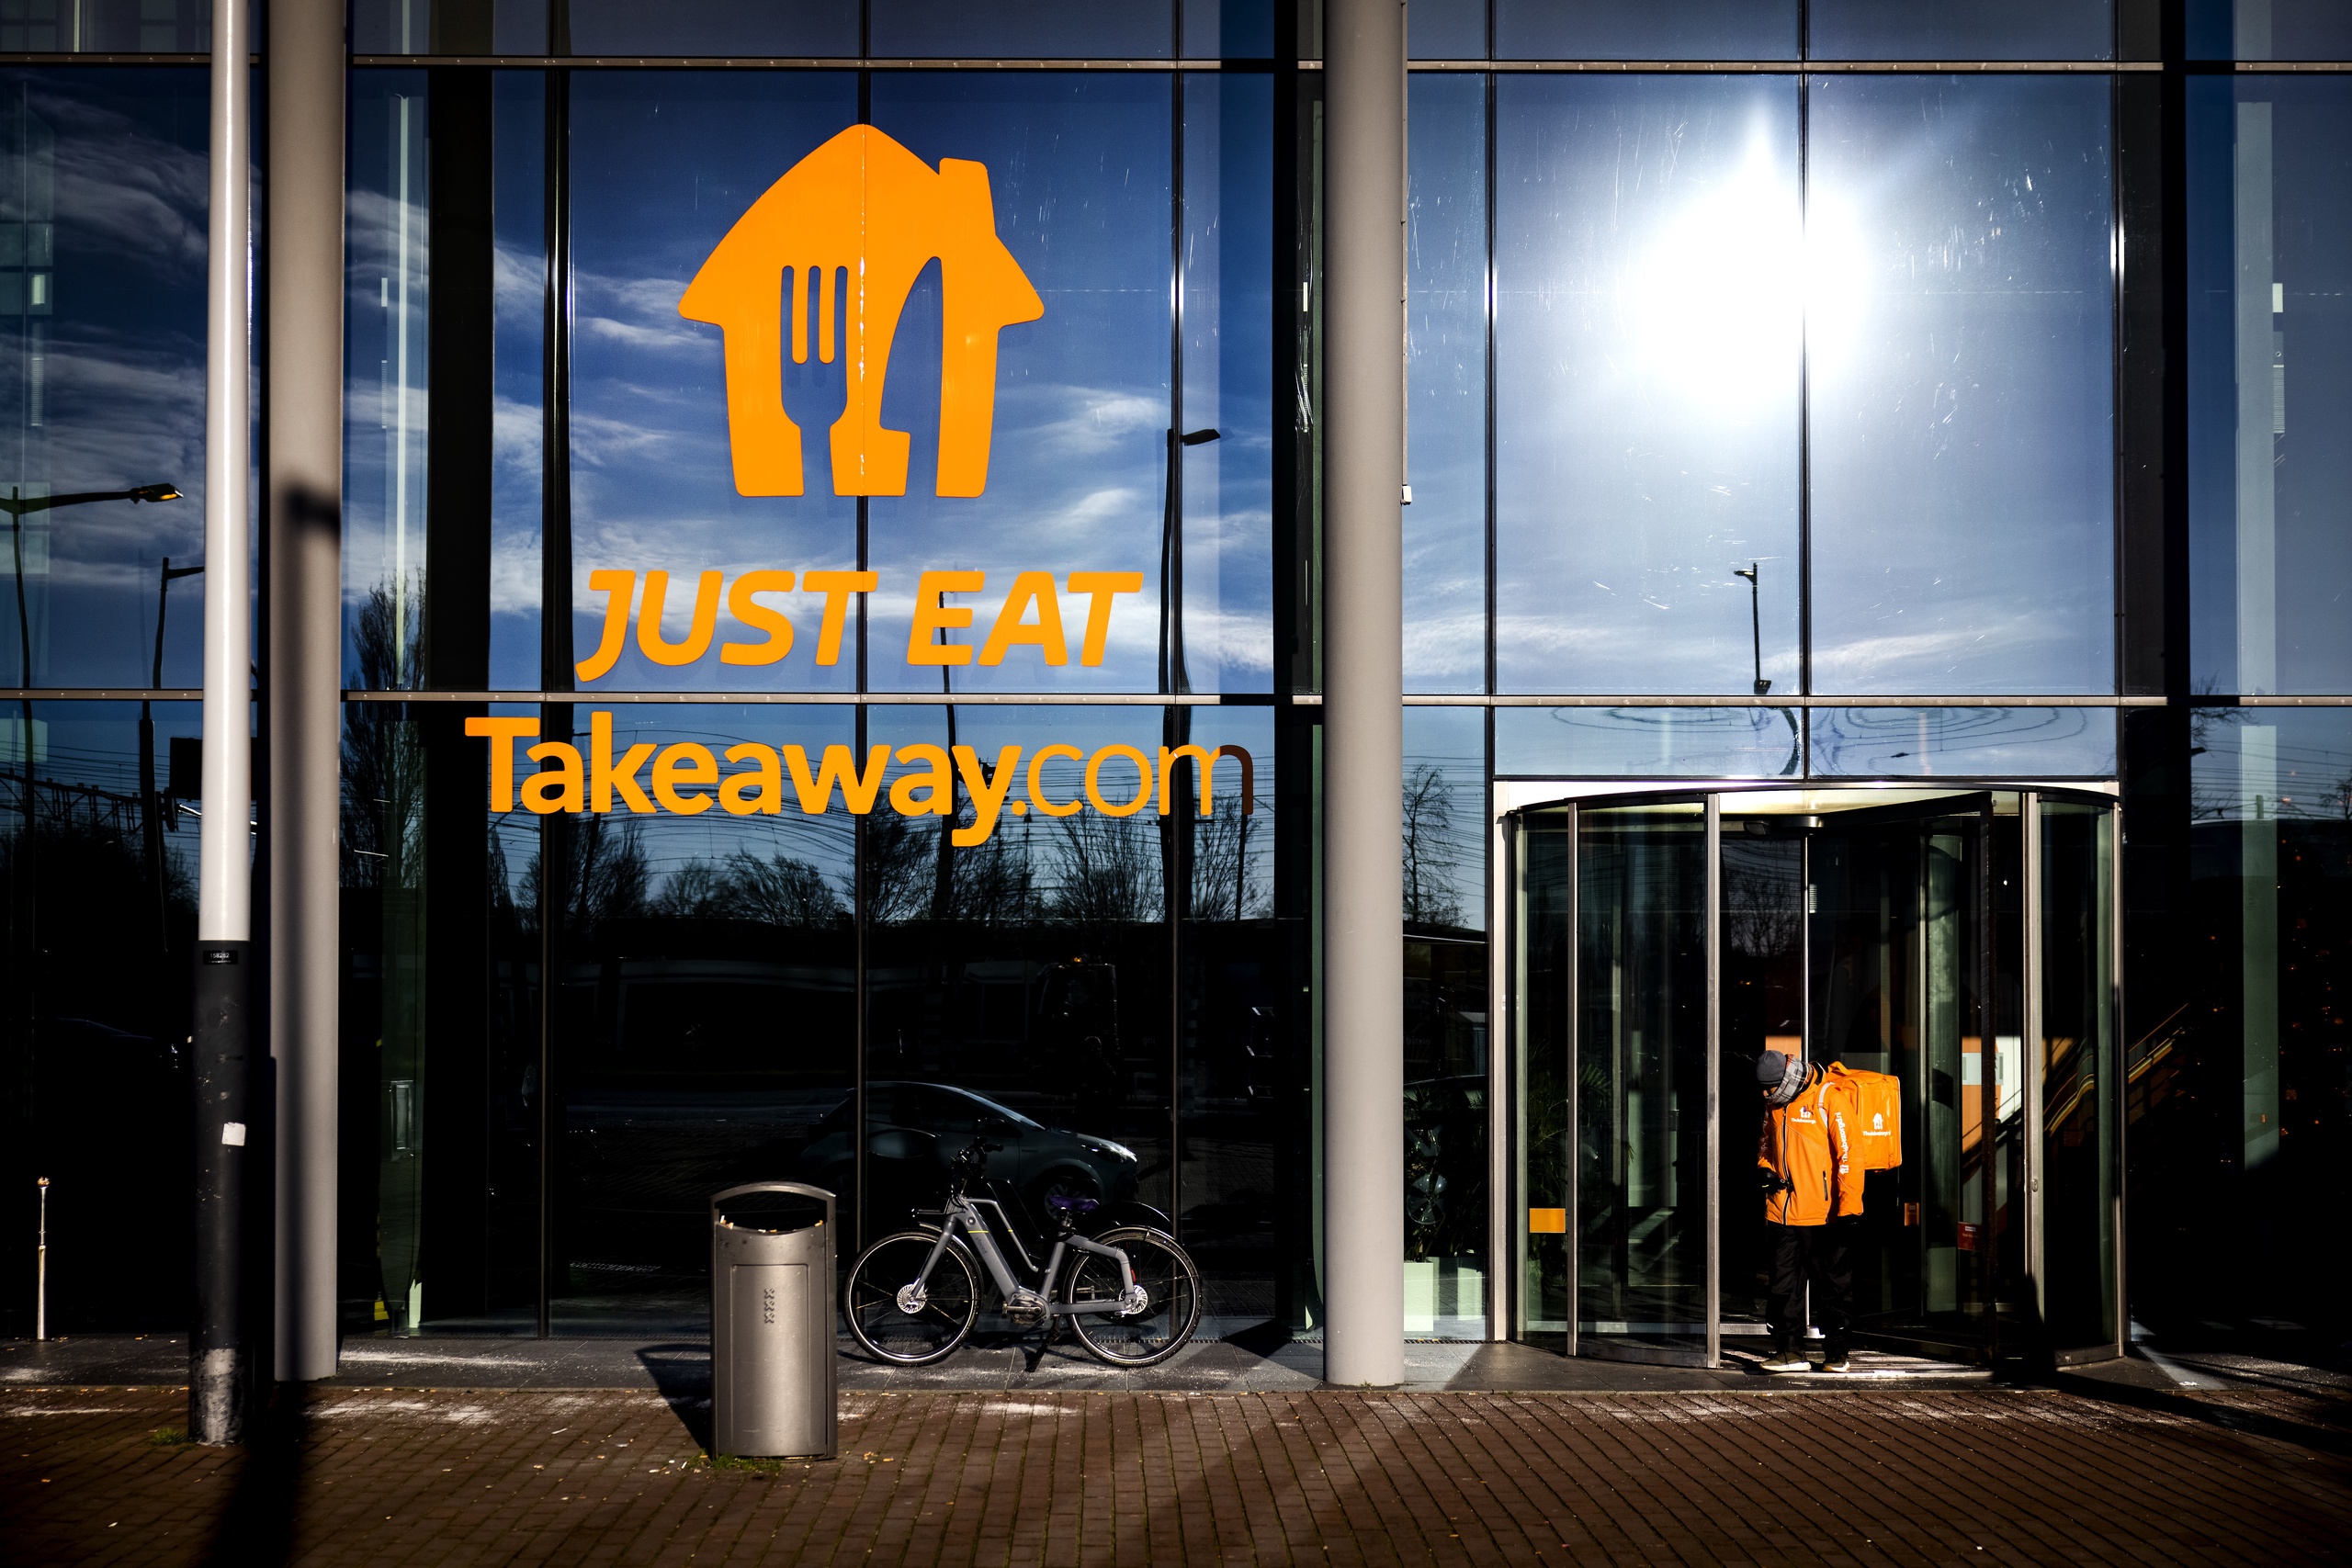 Just eat Takeaway has bought back shares for 150 million euros